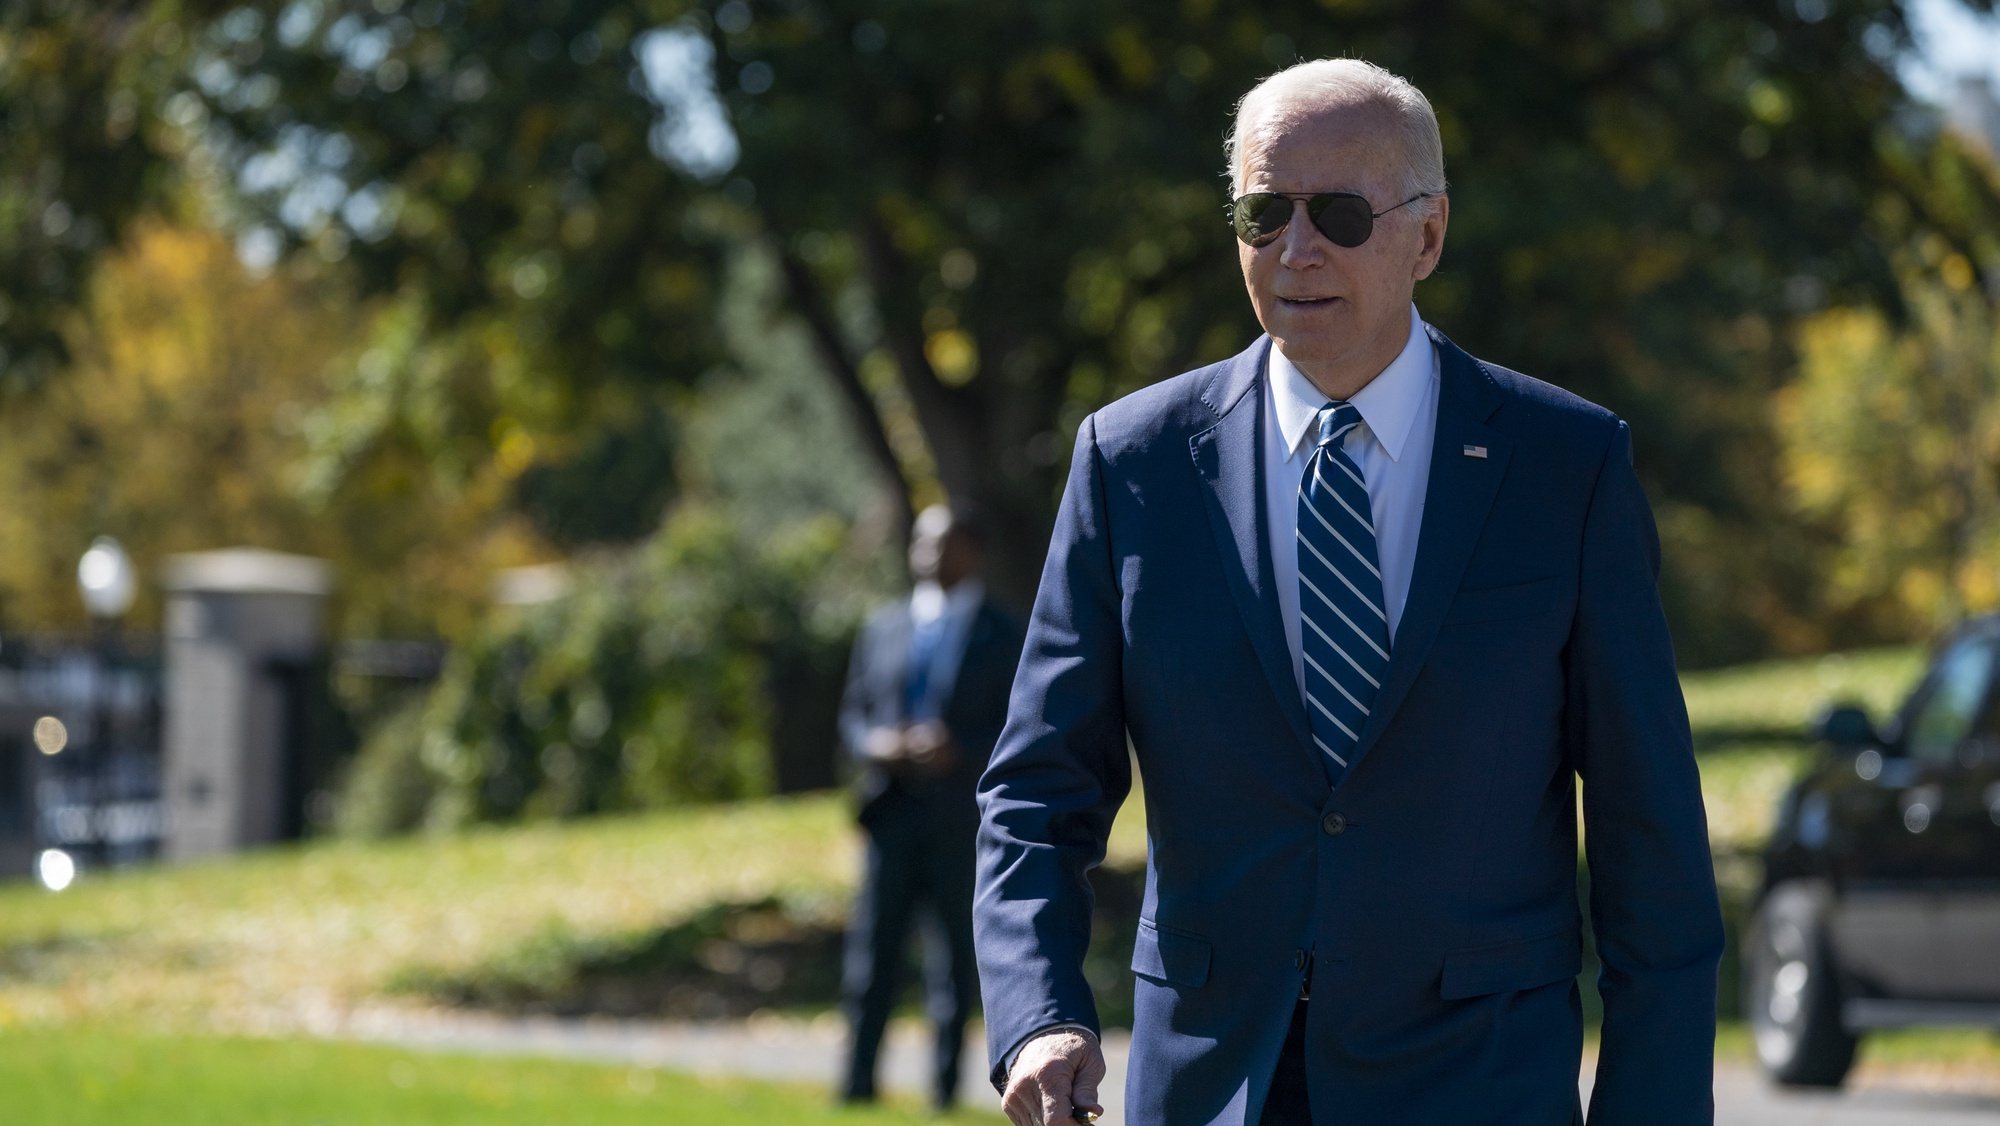 epa10269455 US President Joe Biden walks to board Marine One on the South Lawn of the White House in Washington, DC, USA, 27 October 2022. President Biden is traveling to New York where he will deliver remarks on Micron&#039;s plan to invest in CHIPS manufacturing.  EPA/SHAWN THEW